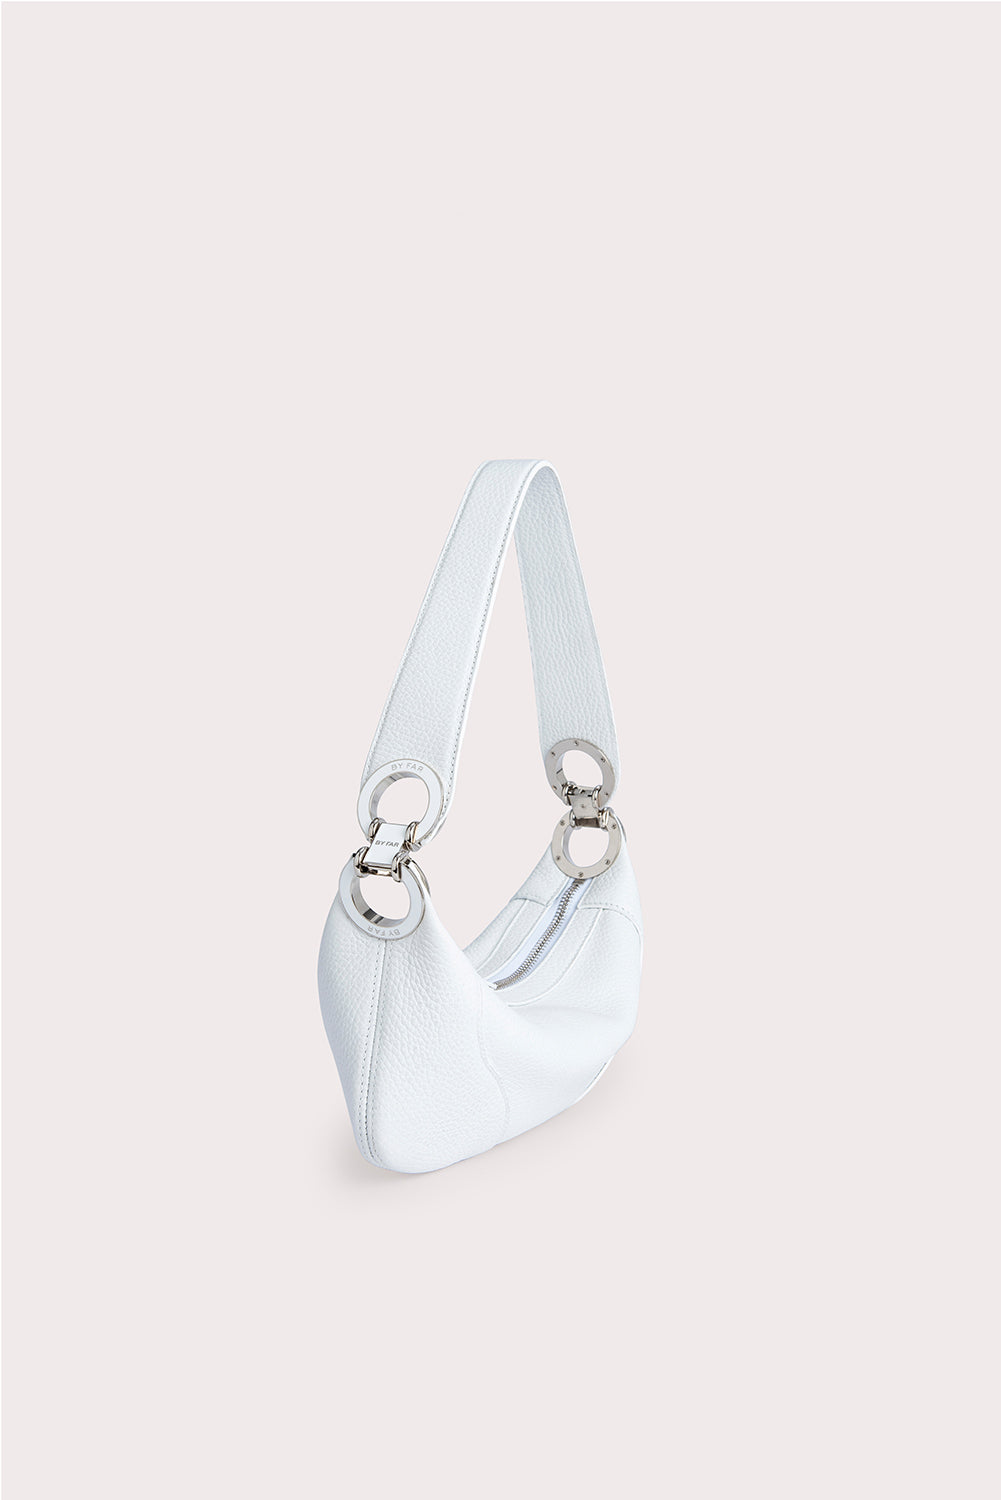 Shoulder Bag Strap Replacement, Off White Strap India